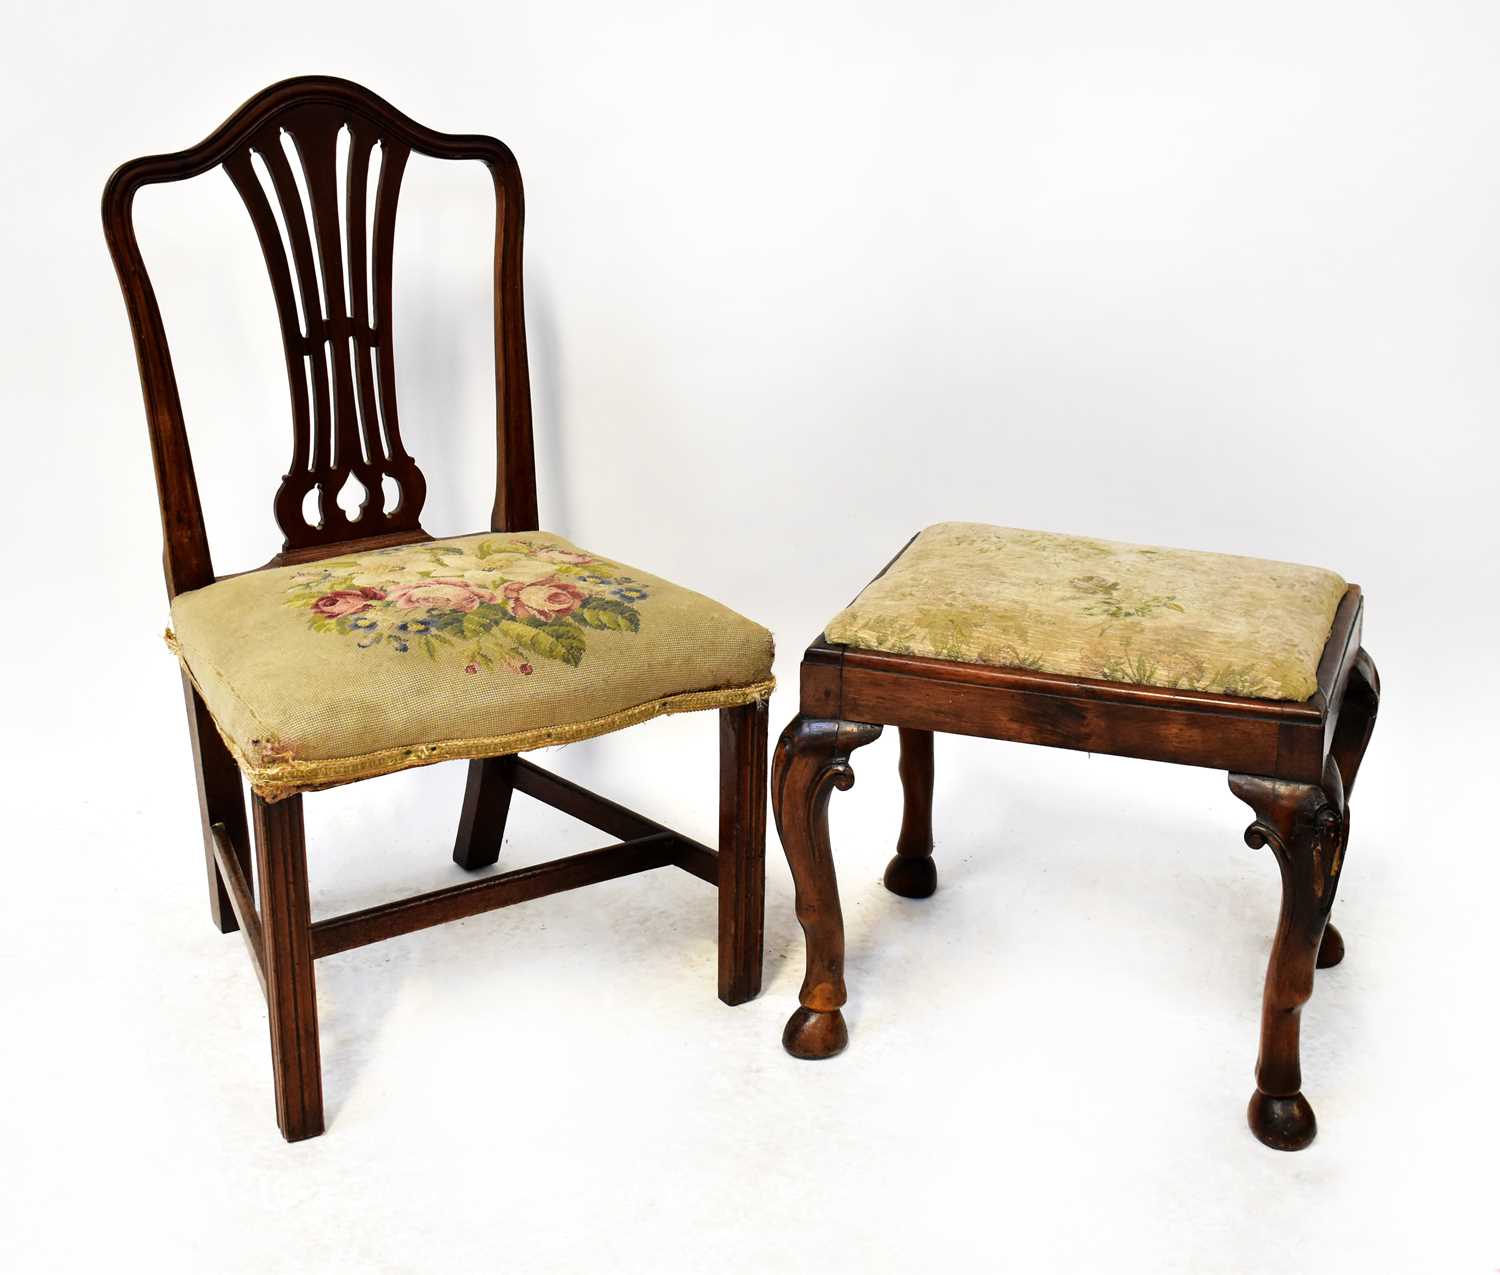 A mid-19th century chair with pierced back, dome top, upholstered seat with stile supports and cross